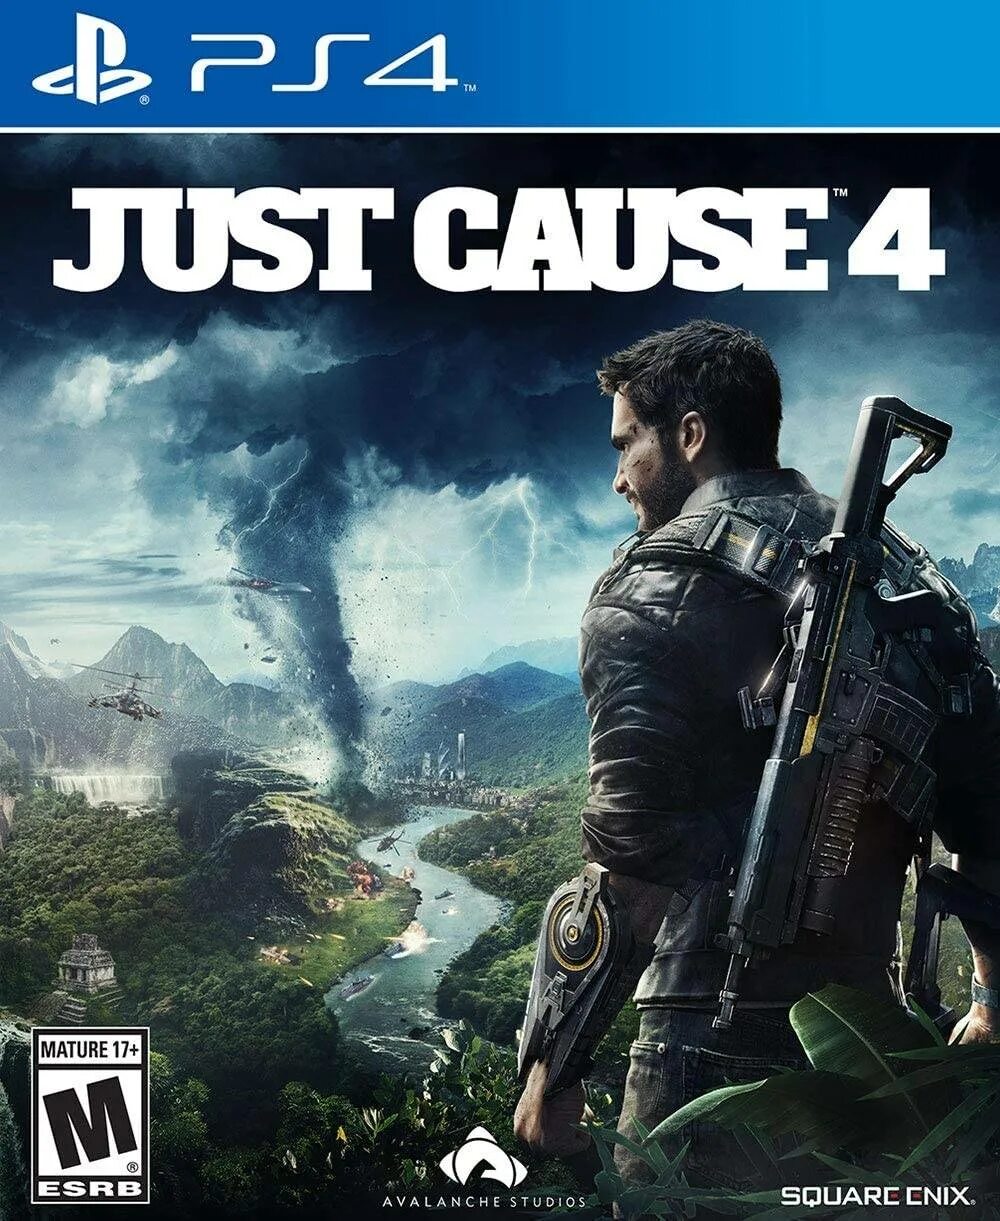 Топ игр купить. Just cause 4 [ps4]. Just cause 4 ps4 диск. Just cause 4 ps4 обложка. Just cause 4 ps4 Cover.